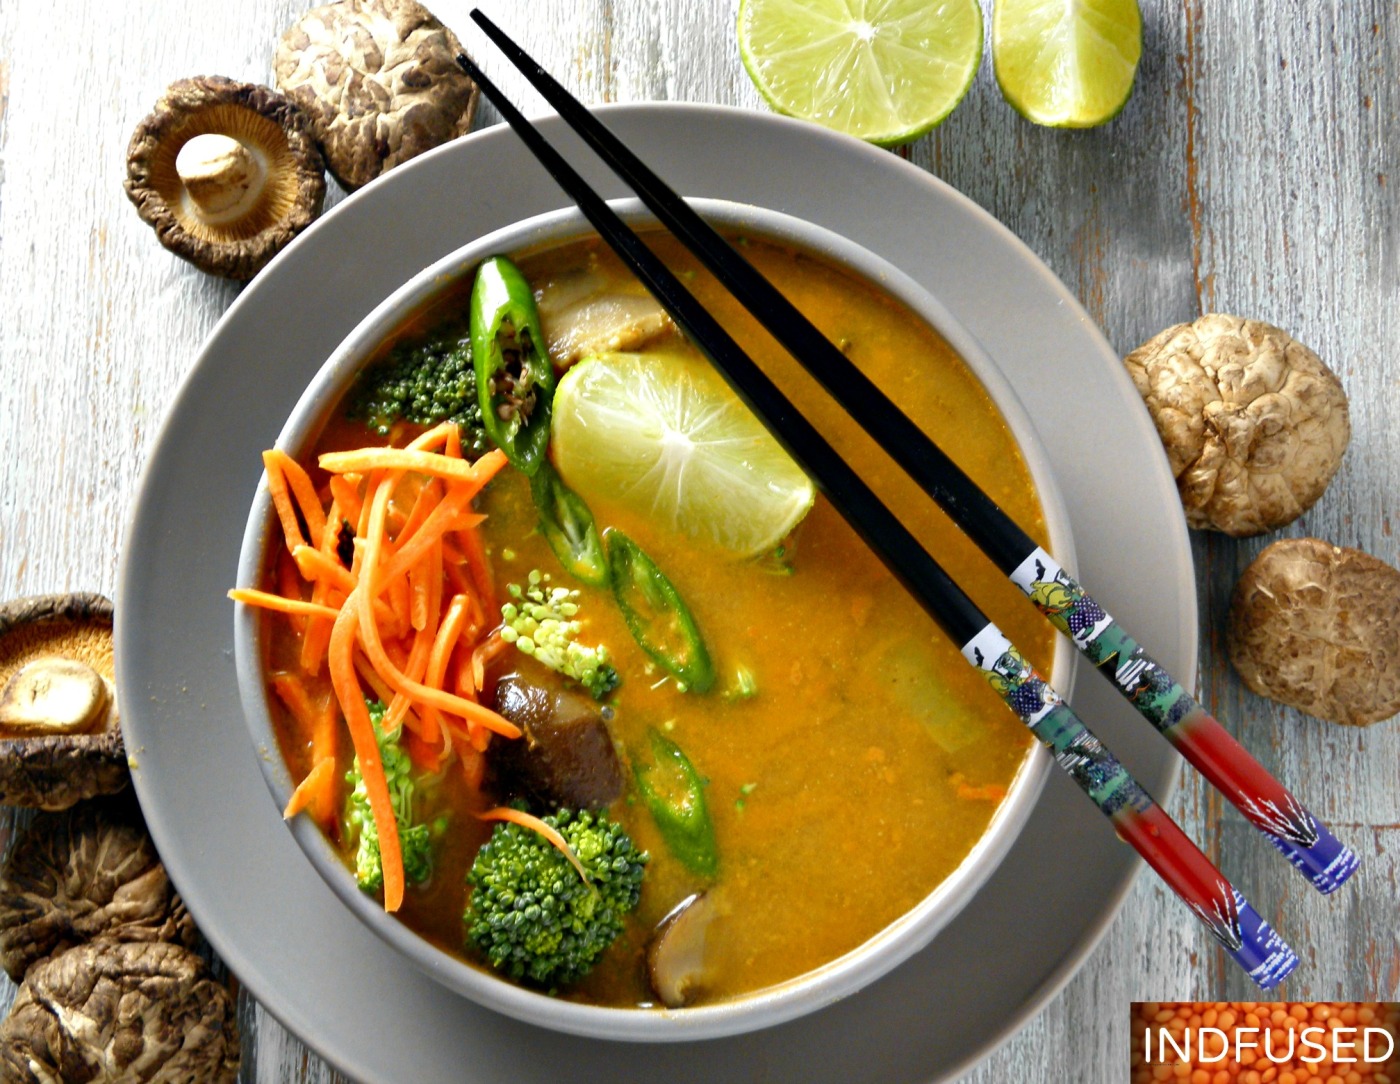 Indian fusion recipe for Thai flavored soup using protein rich dal, dried shitake mushrooms and broccoli. Easy to make, filling and delectable soup